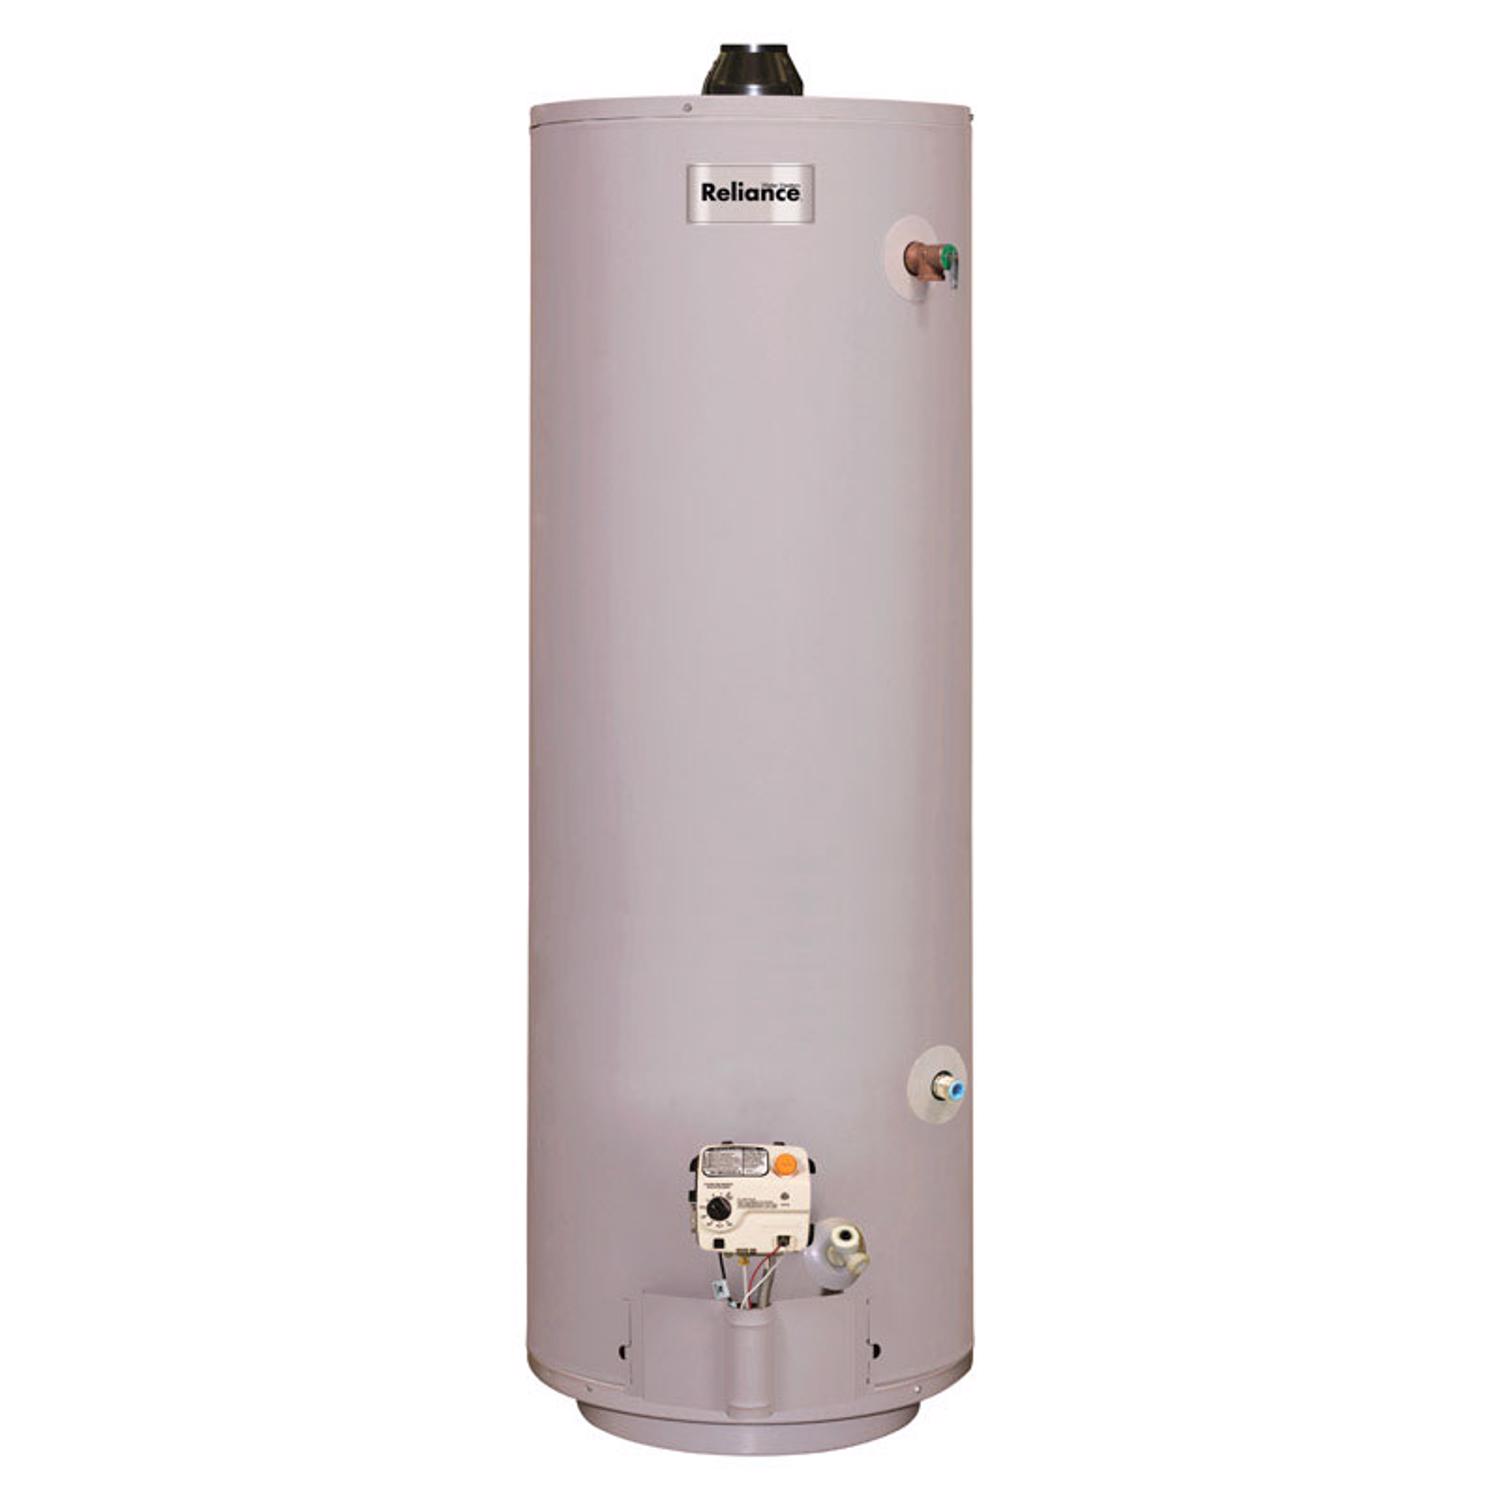 Reliance 30 gal 30000 BTU Natural Gas/Propane Mobile Home Water Heater -  6-30-MDV 250